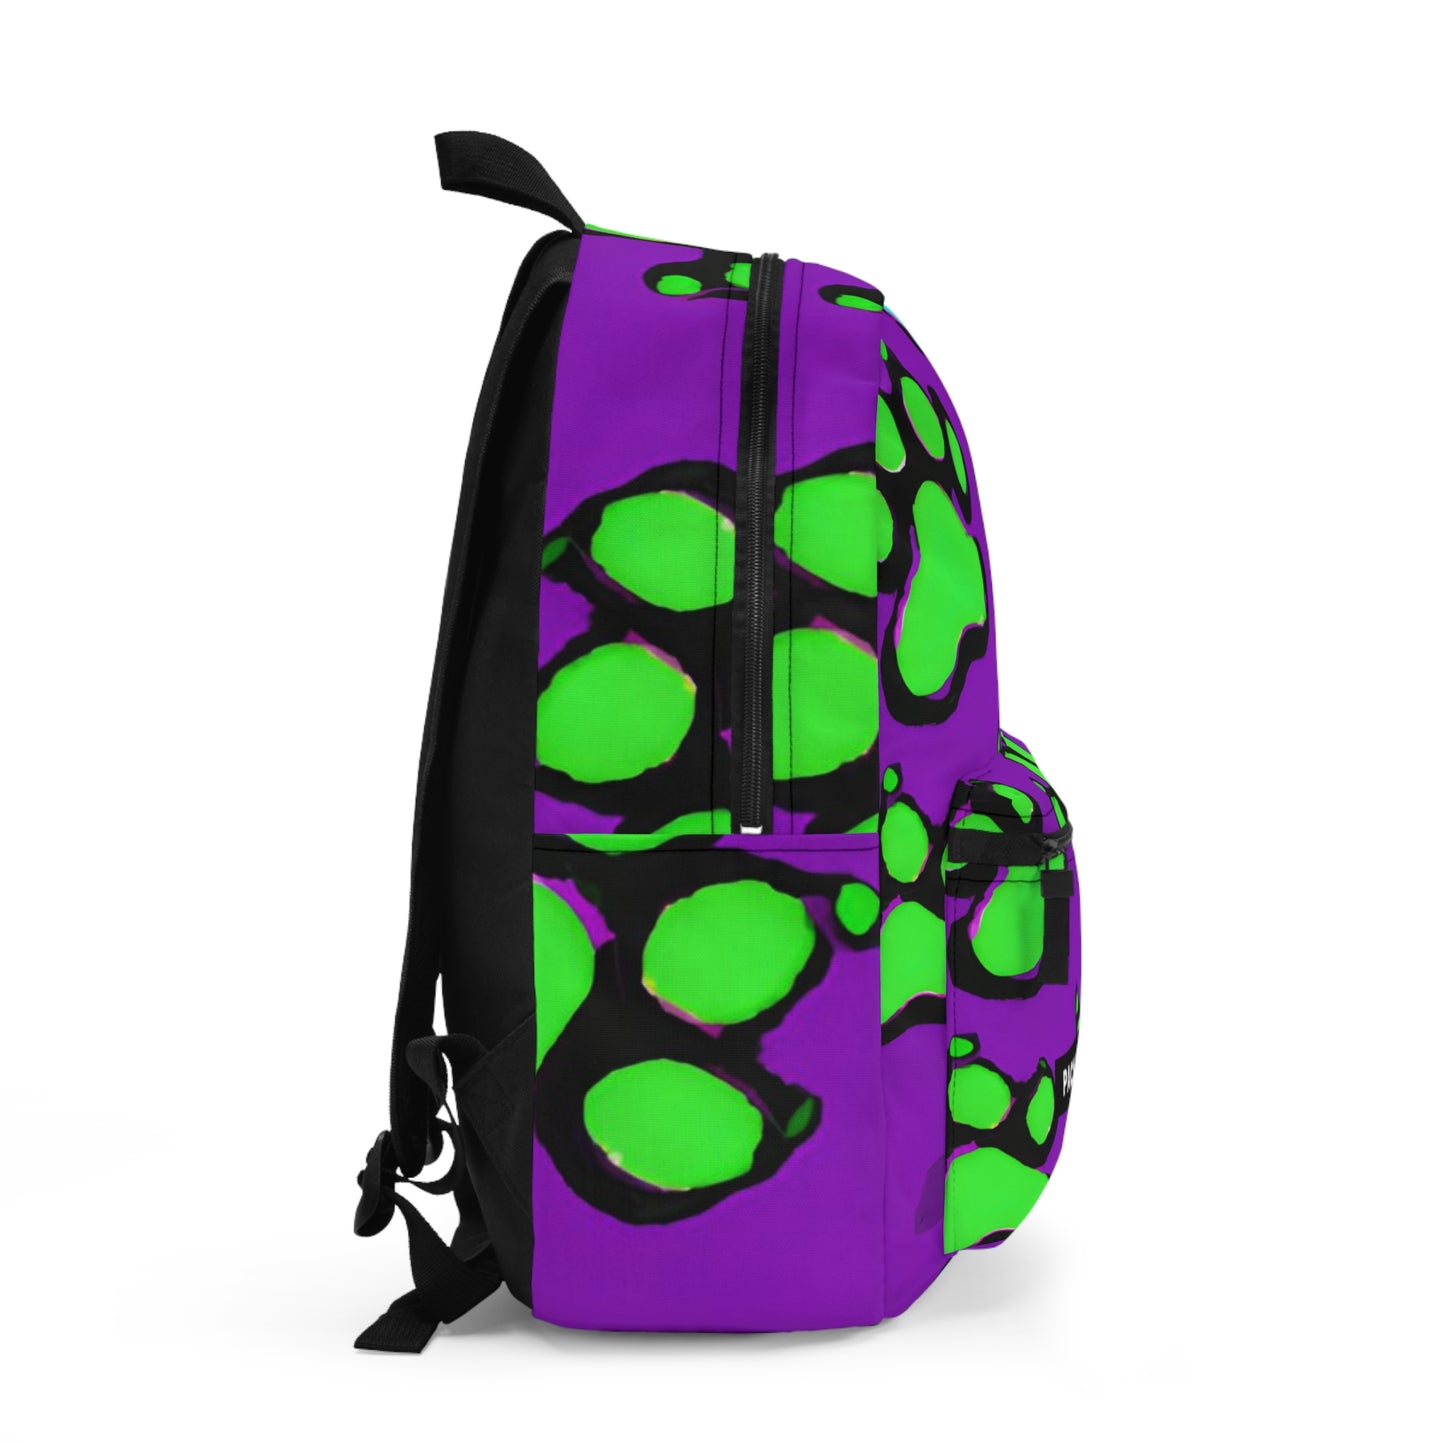 .

Marquise de Chic - Paw Print - Backpack